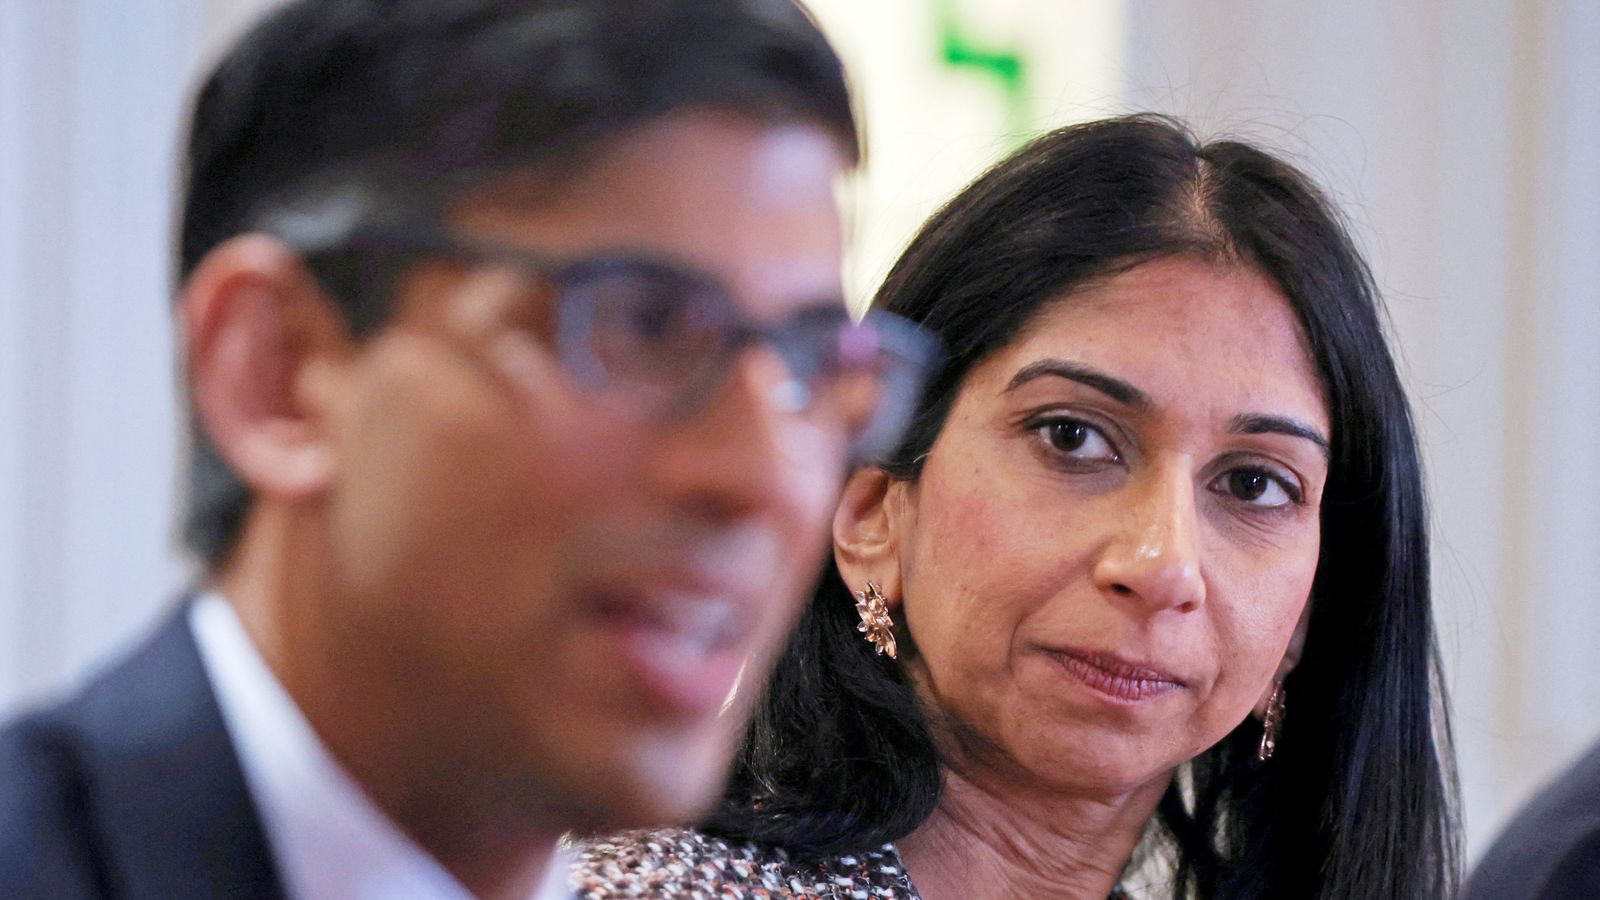 Rishi Sunak has 'full confidence' in Suella Braverman after controversial Times article, Number 10 says